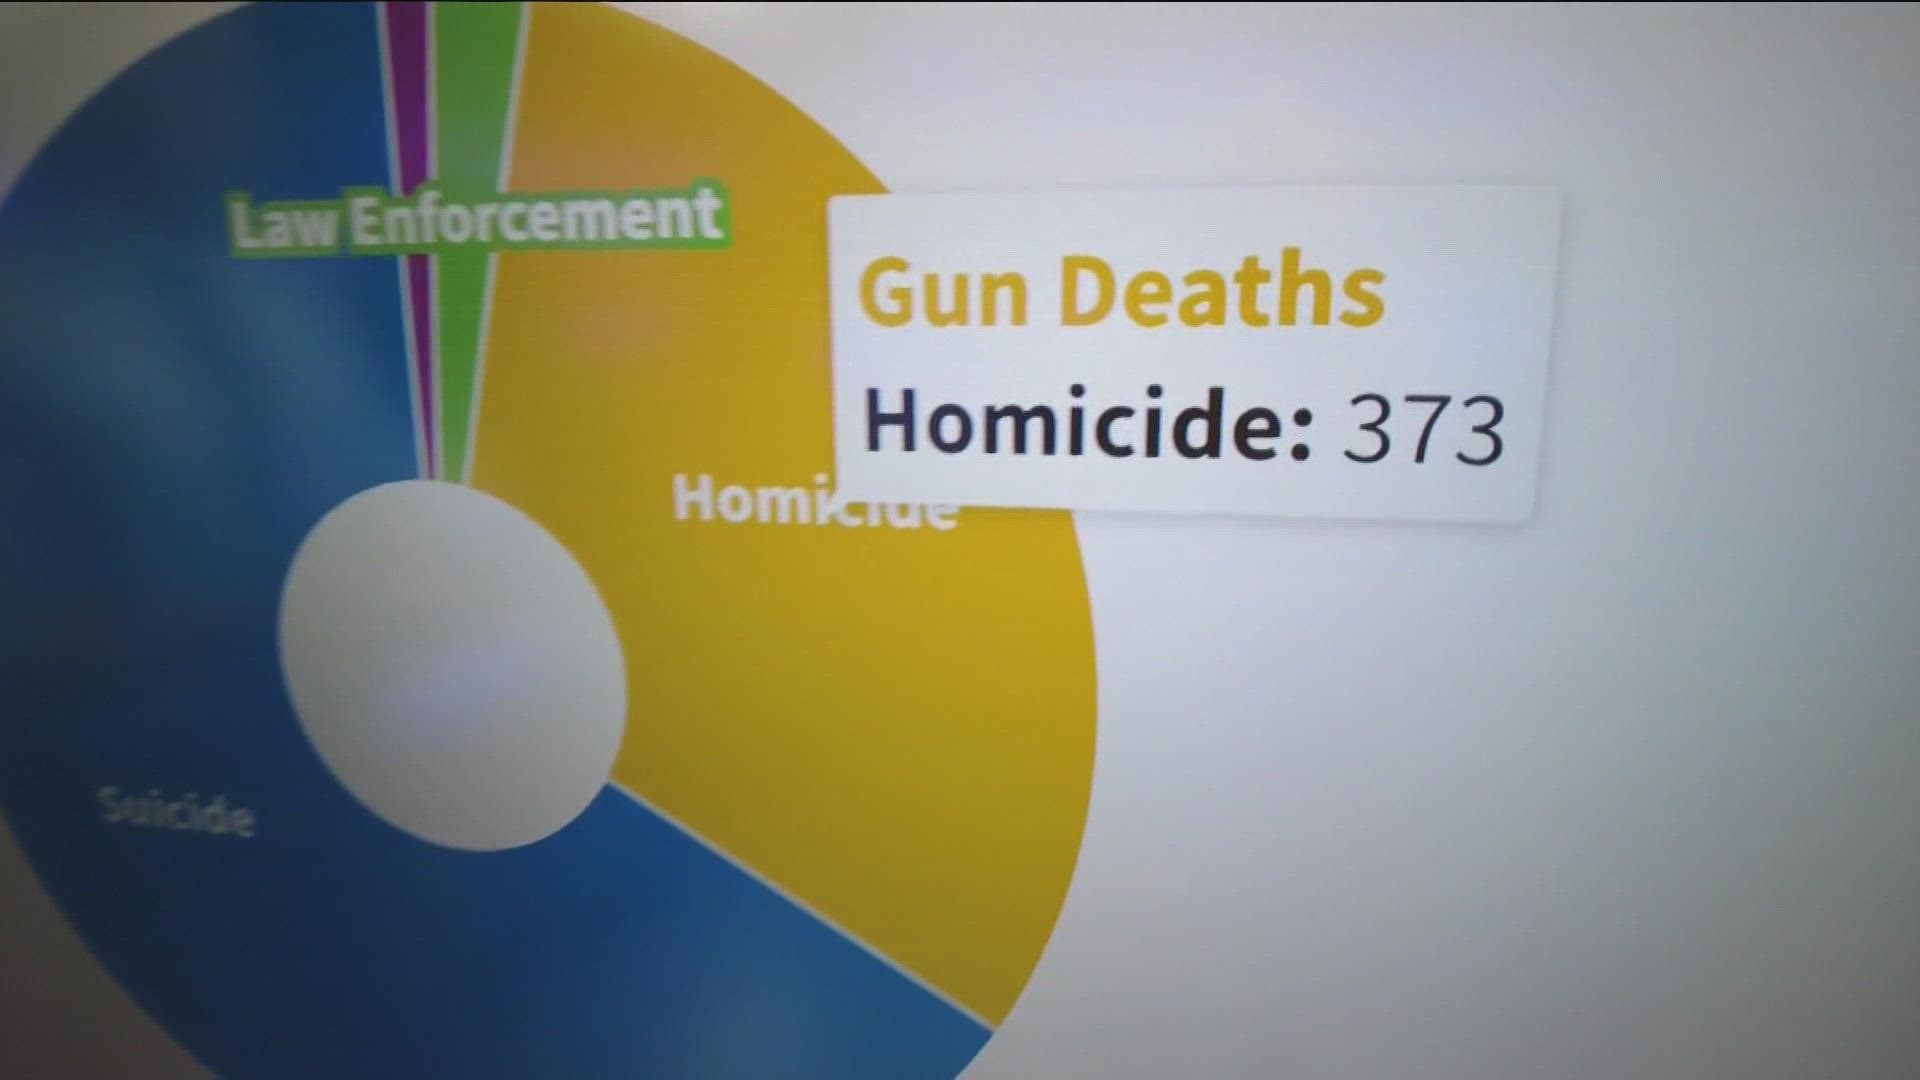 Both suicides and homicides are counted in the number